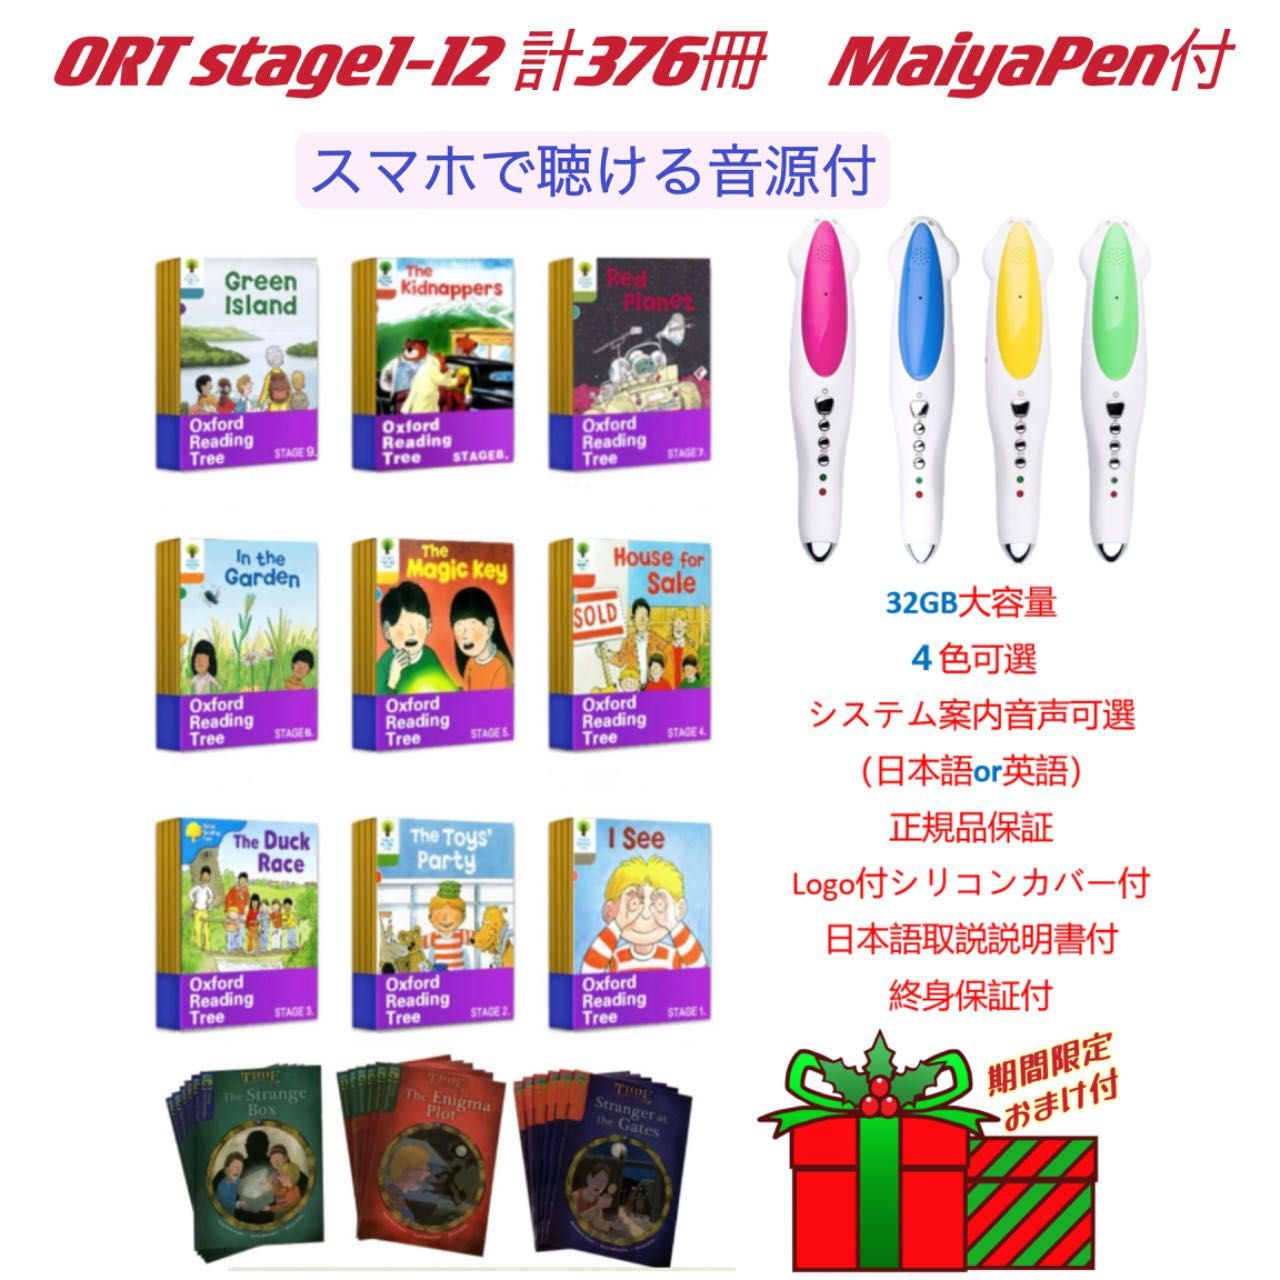 ORT stage1-12フルセット 376冊 マイヤペン対応 maiyapen - 本